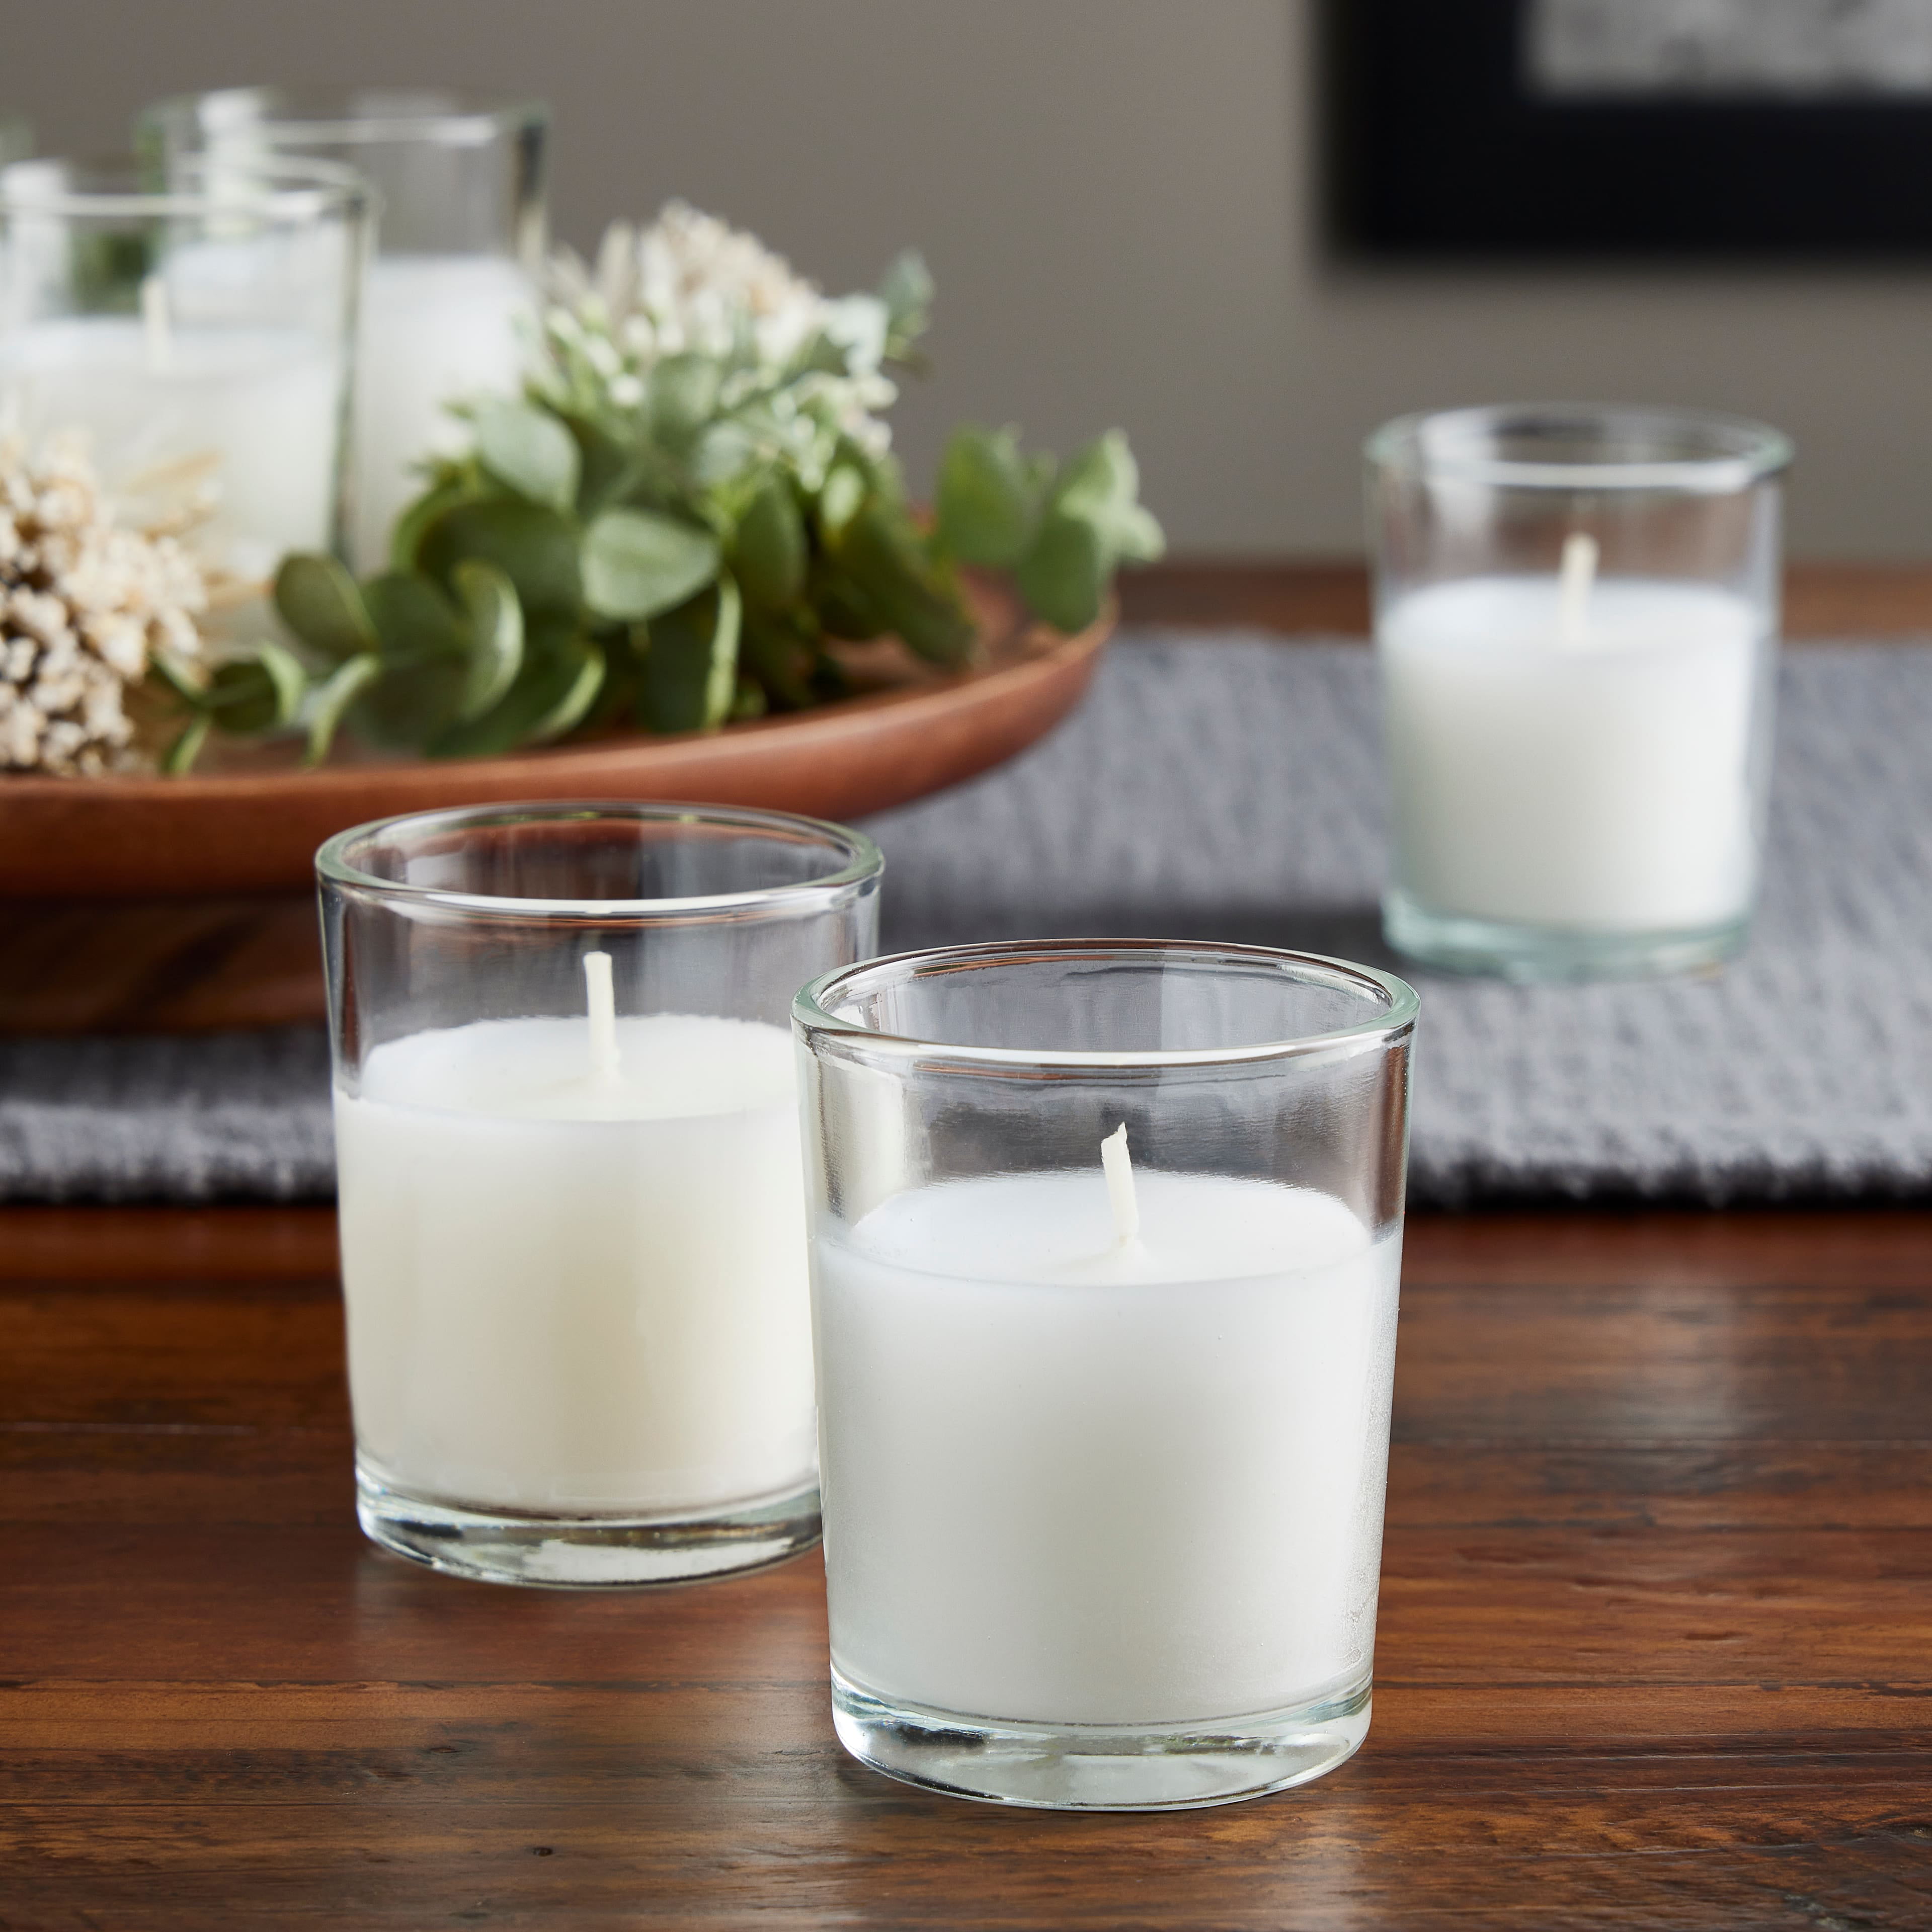 12 Packs: 12 ct. (144 total) White Glass Votive Candles Pack by Ashland®  Basic Elements™